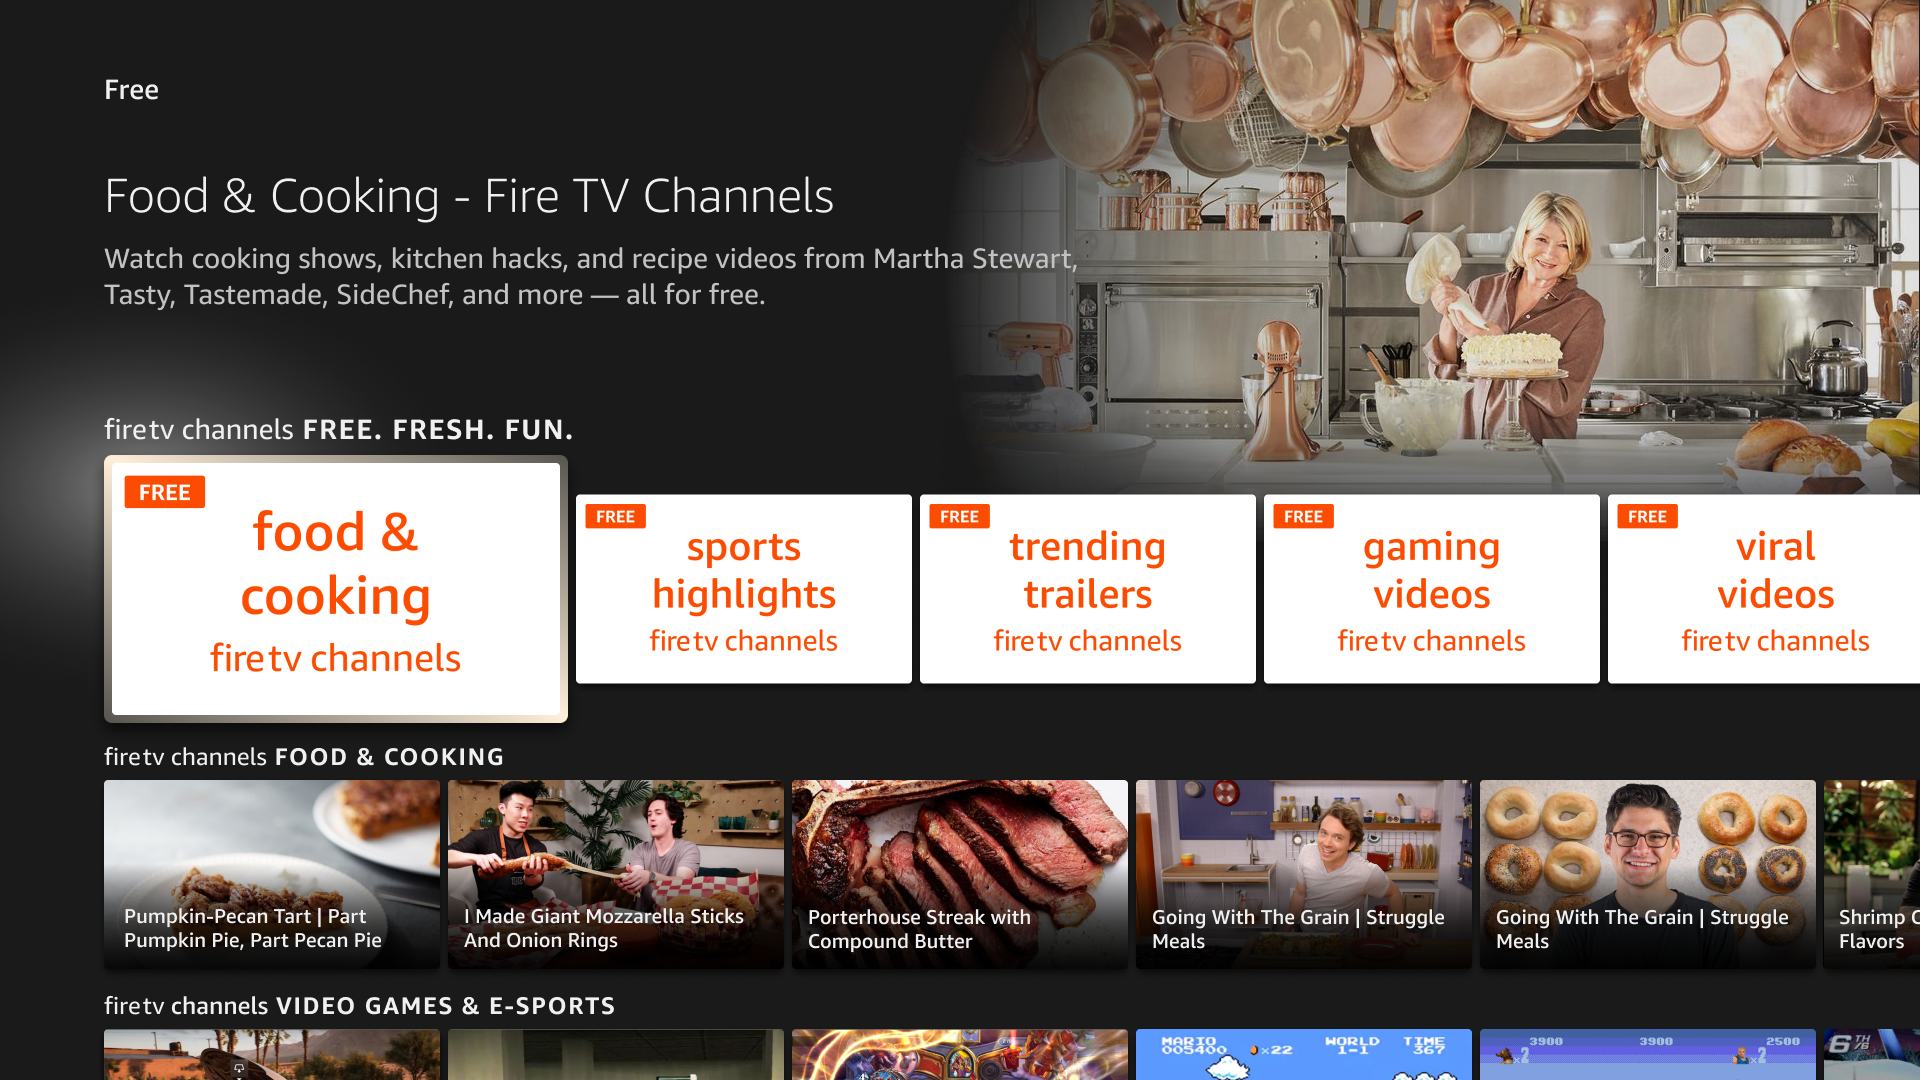 Fire TV Channels brings even more free TV to the platform